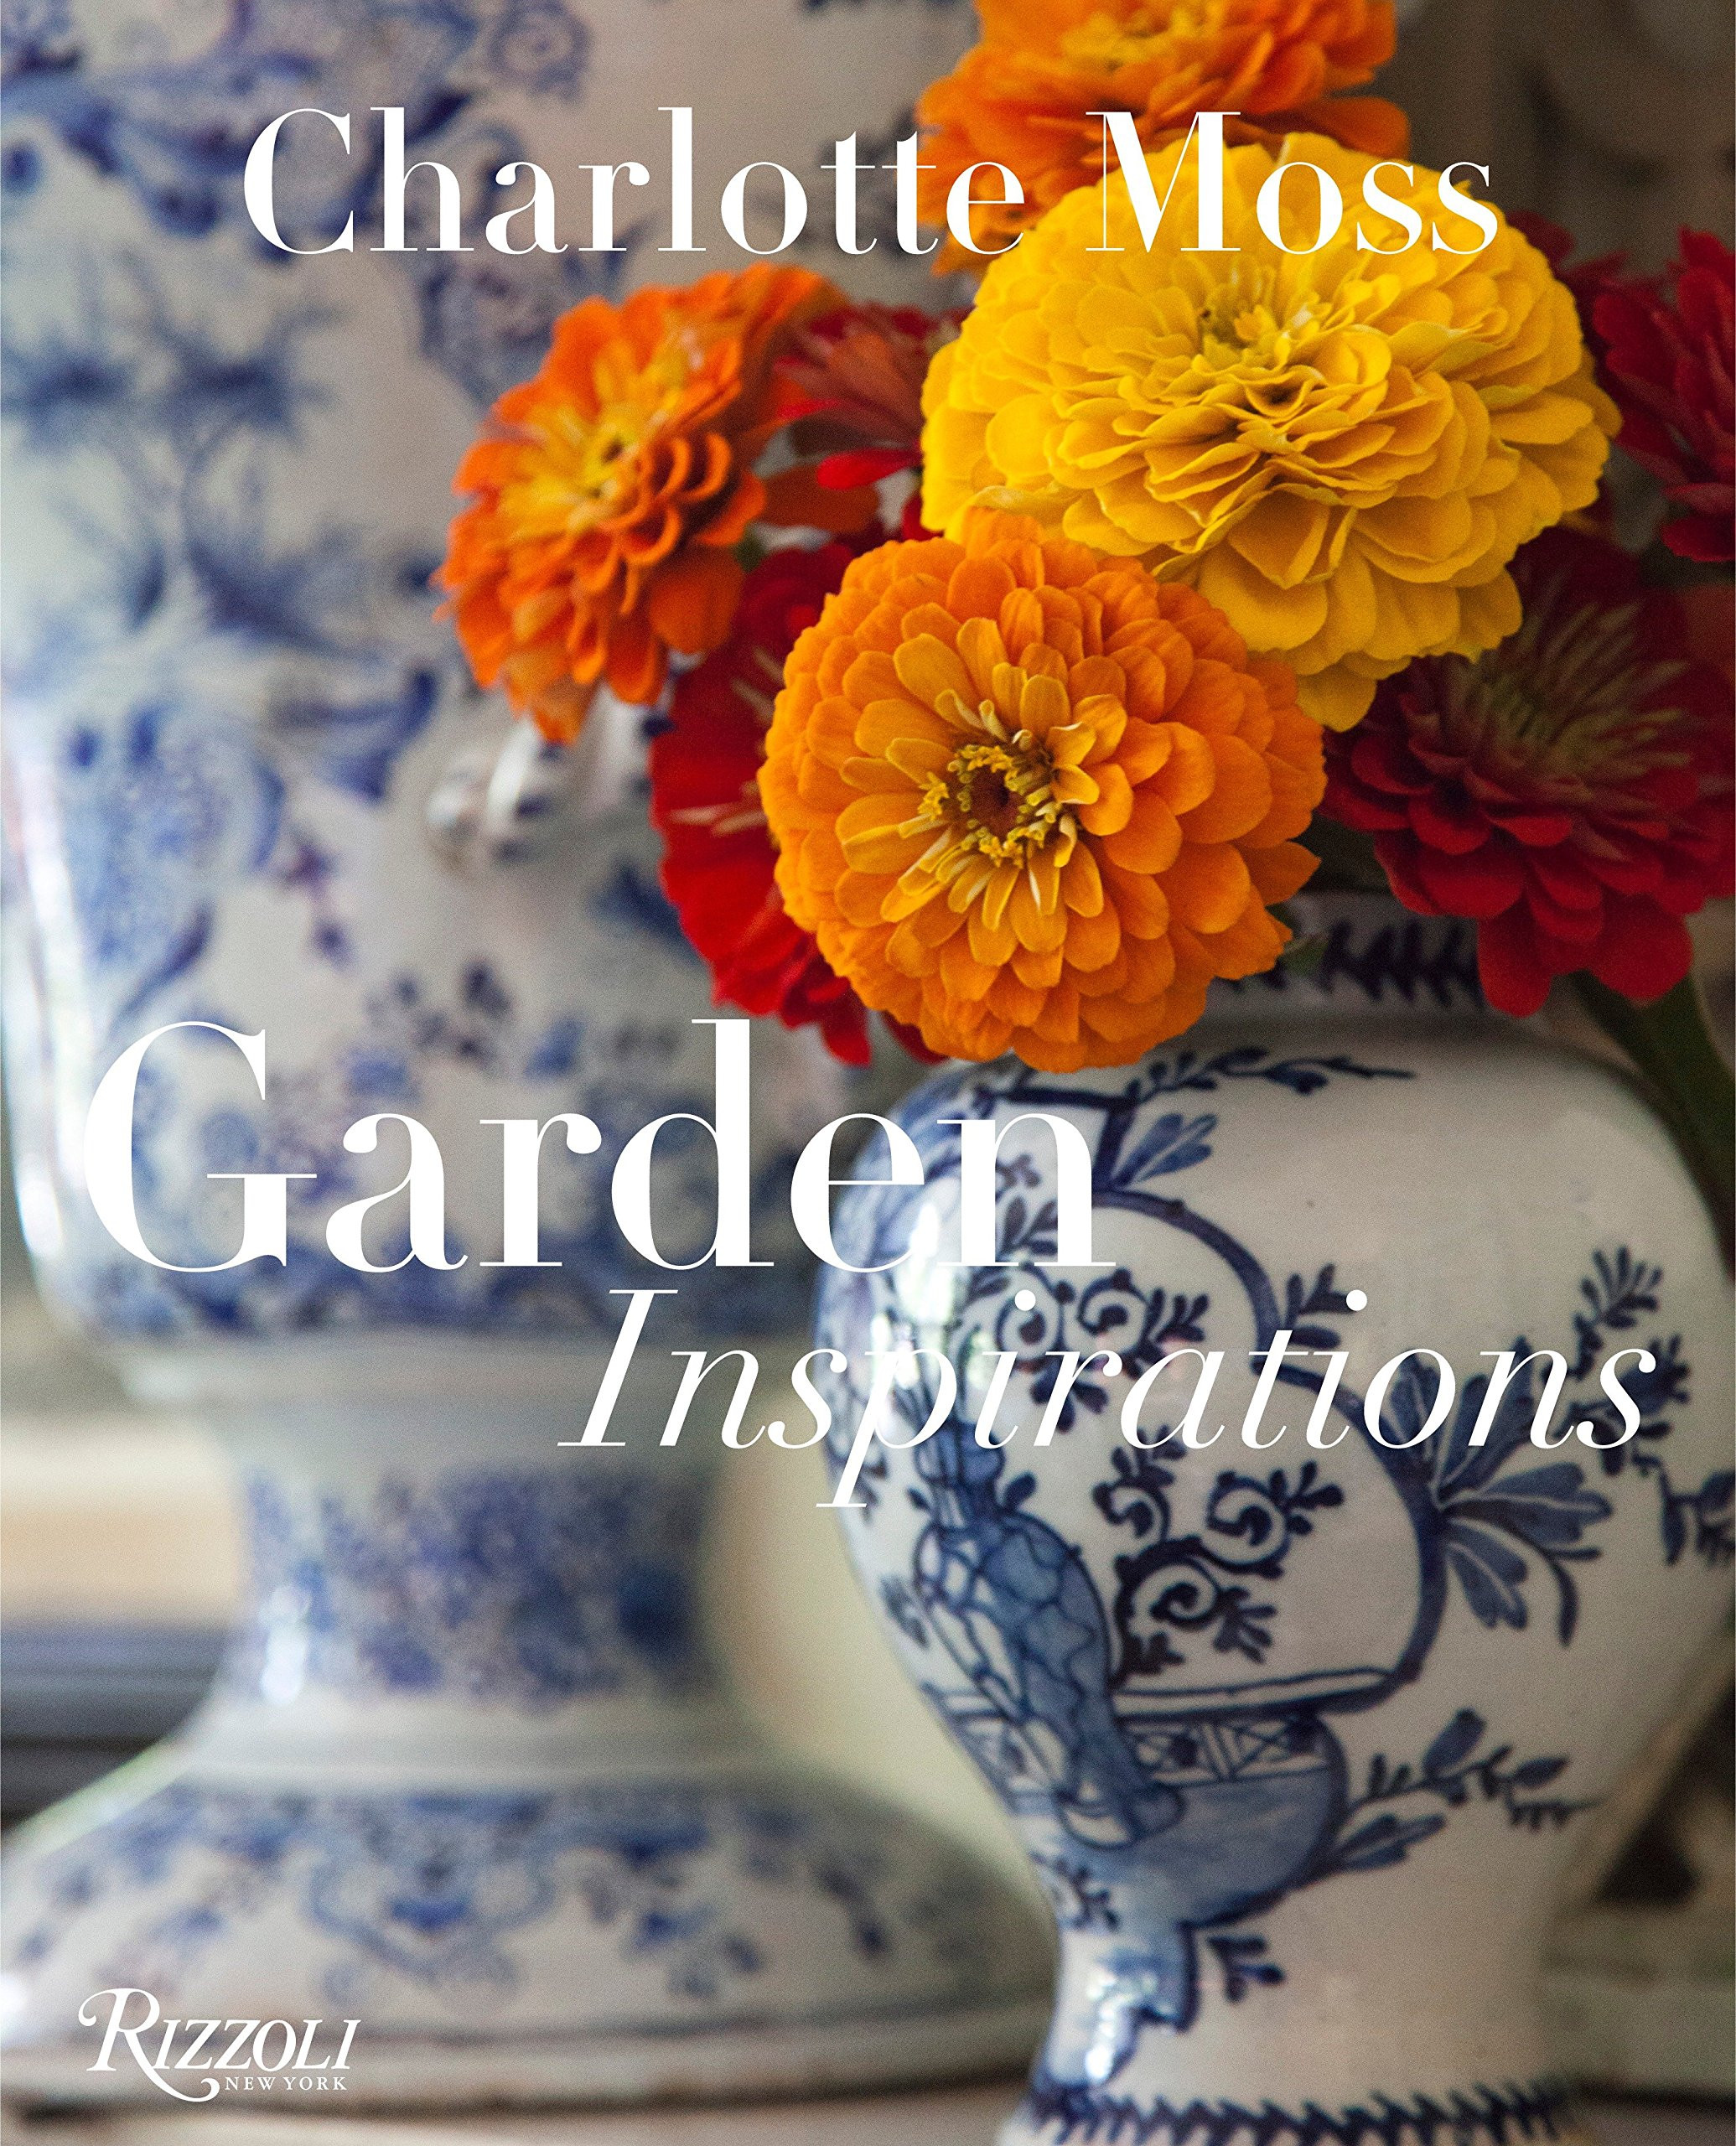 23 Fashionable Just Flowers No Vase 2024 free download just flowers no vase of charlotte moss garden inspirations charlotte moss barry friedberg pertaining to charlotte moss garden inspirations charlotte moss barry friedberg barbara l dixon 9780